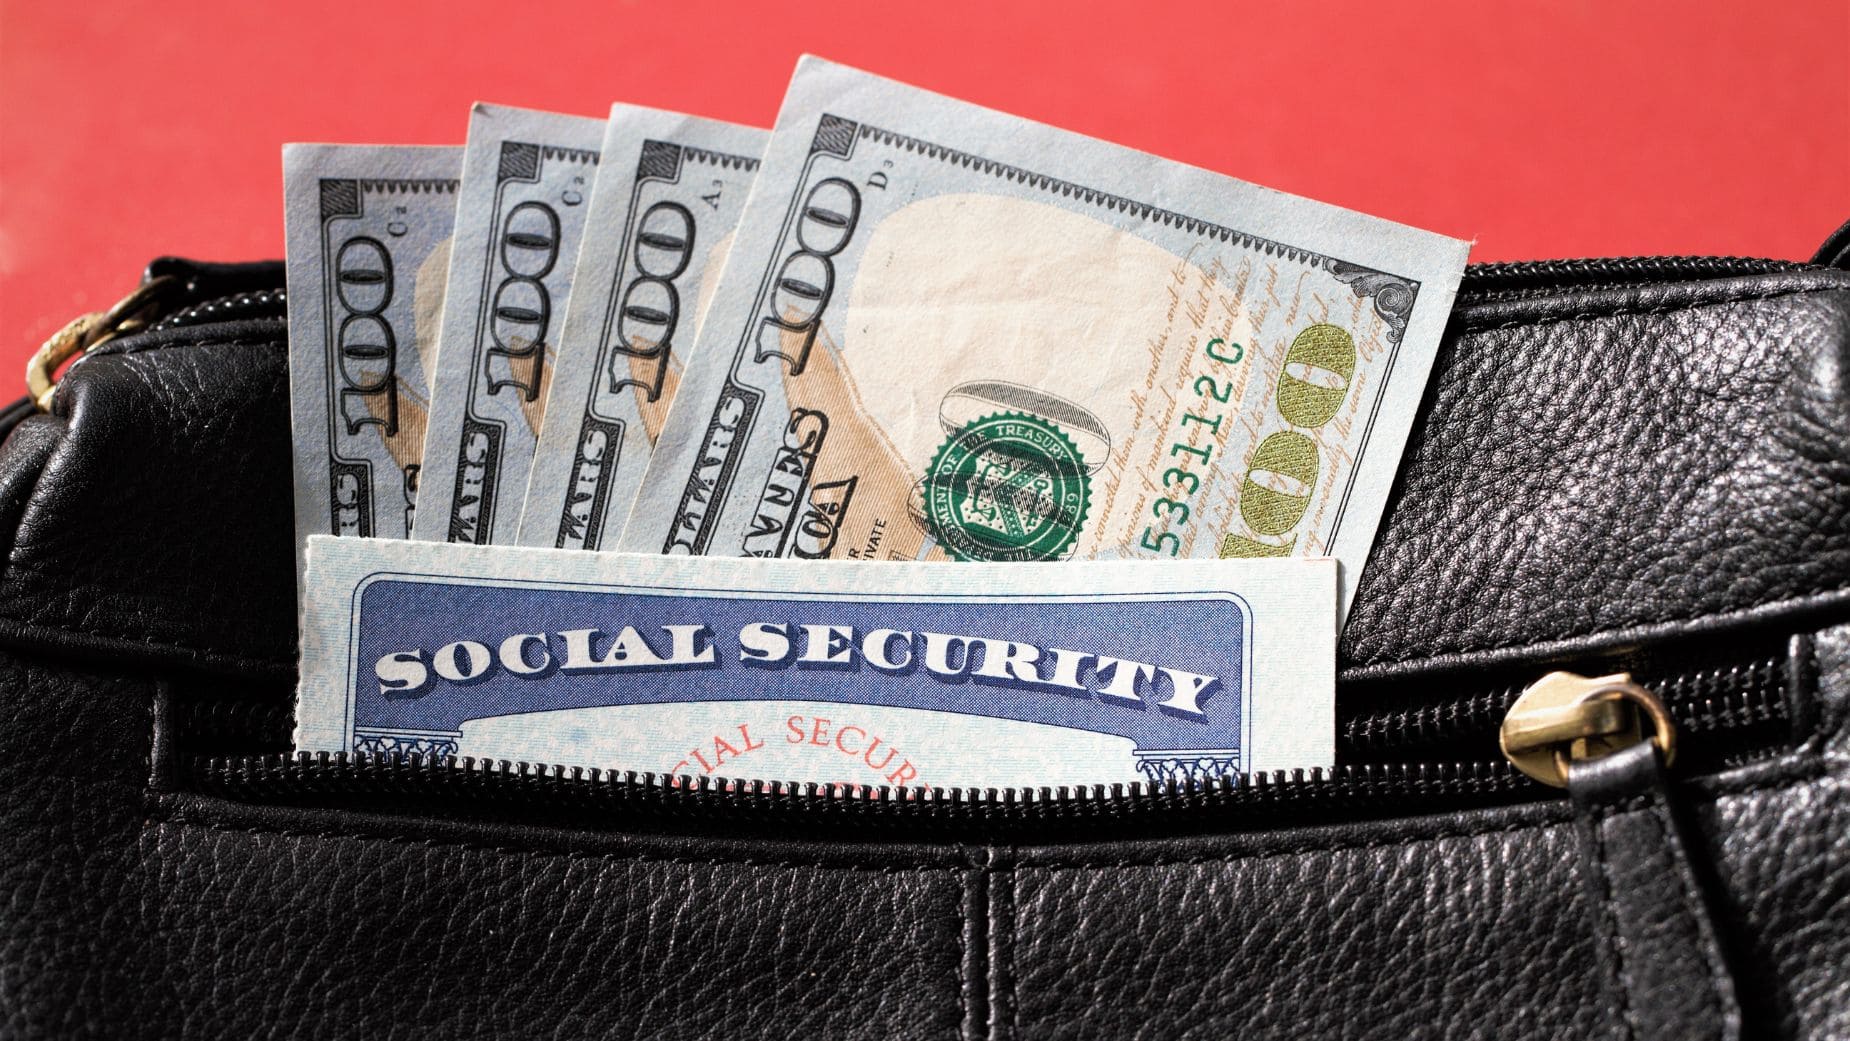 These are the requirements to get the Supplemental Security Income payment